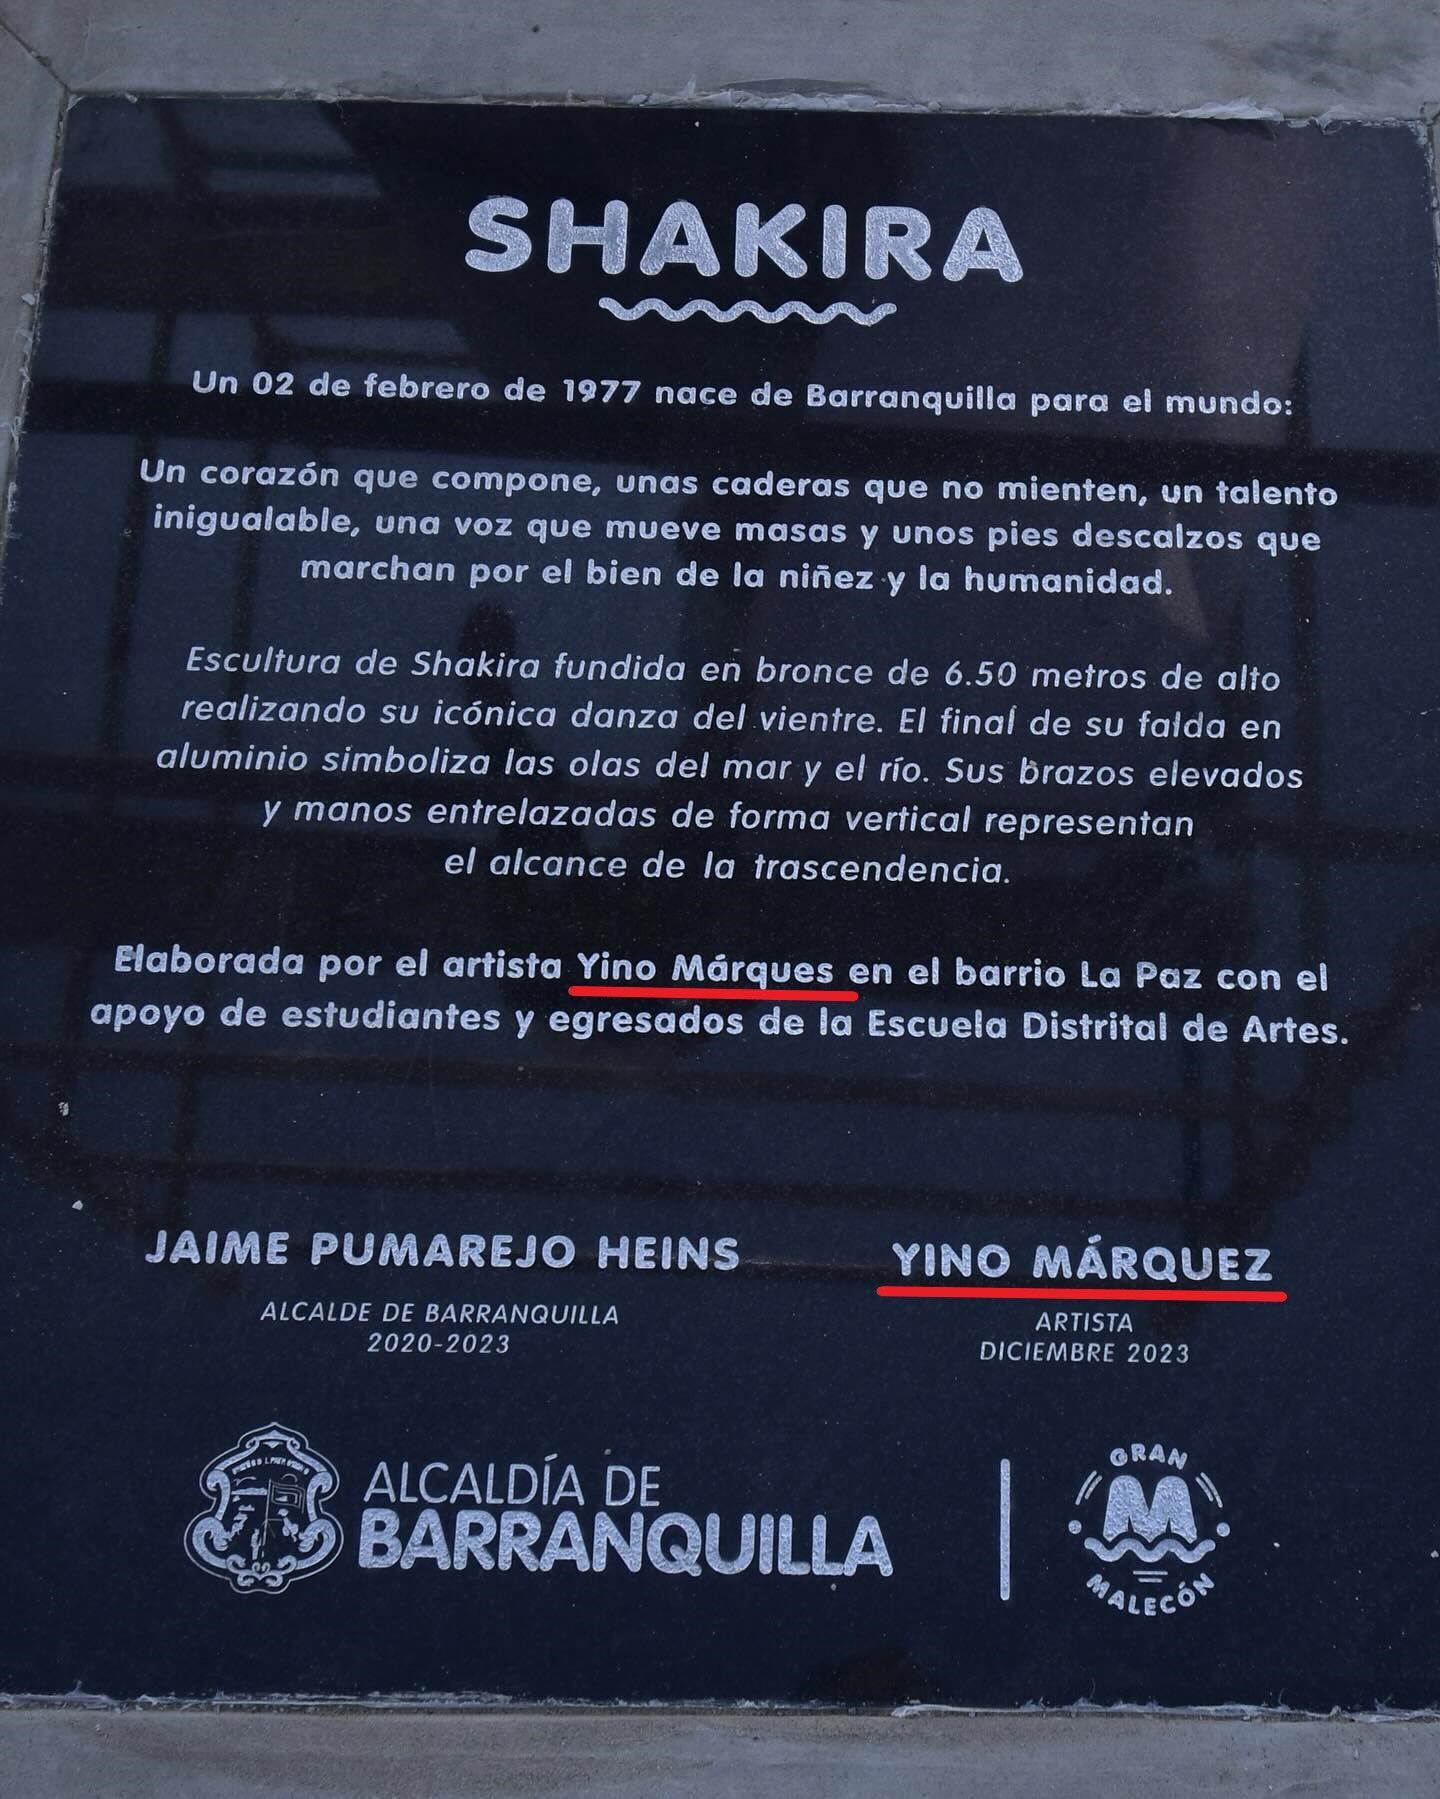 A 6.5-meter statue of Shakira has been erected in Colombia, but attentive fans spotted an error on the sign. Photo